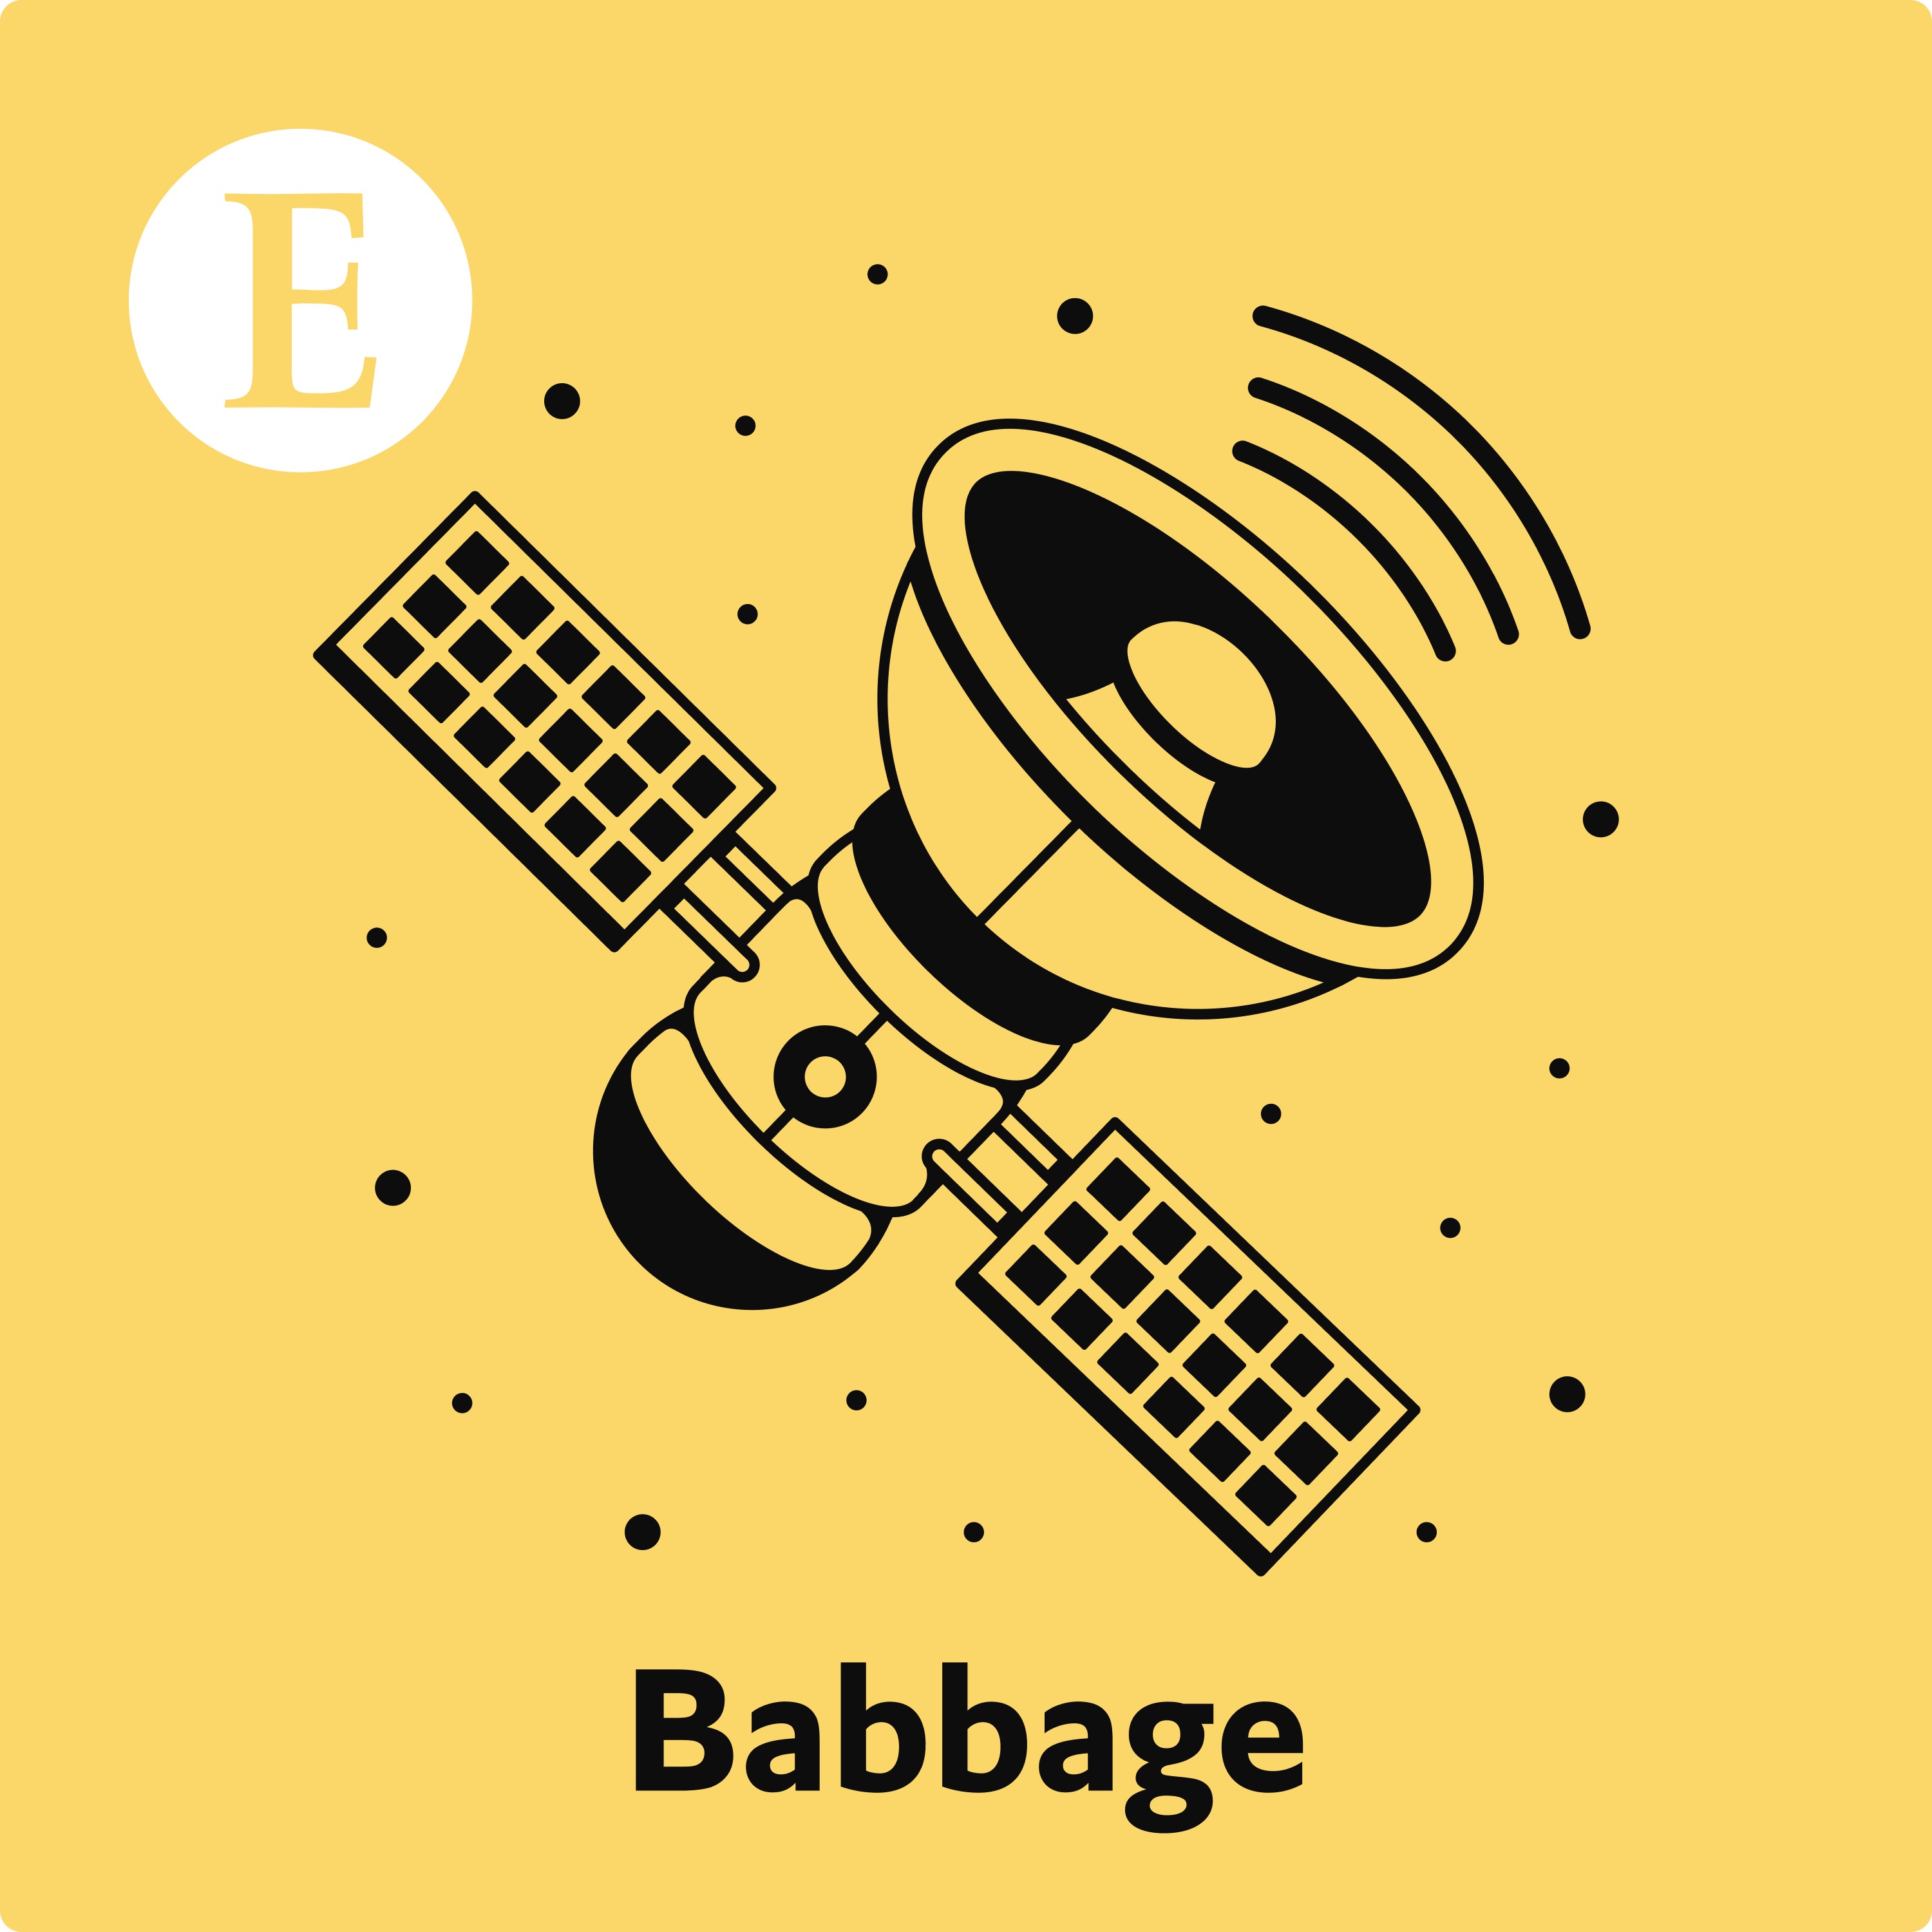 Babbage: How to avoid a battery shortage